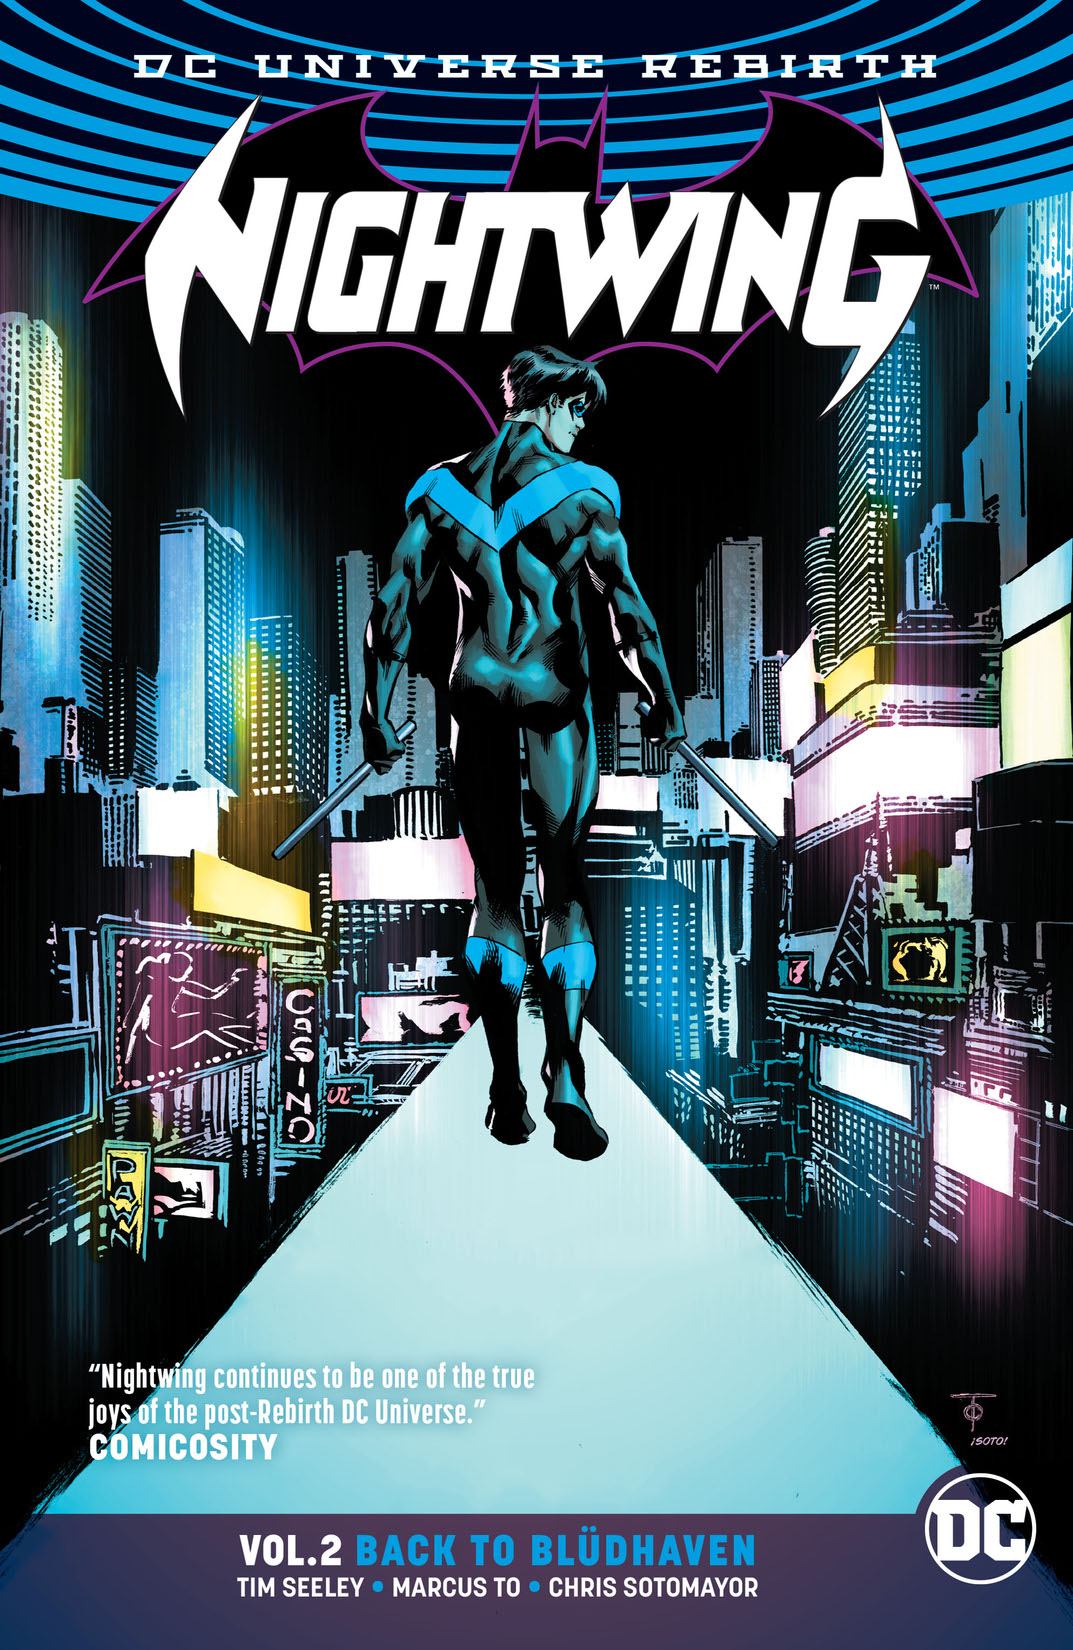 Nightwing Vol. 2: Back to Bludhaven preview images